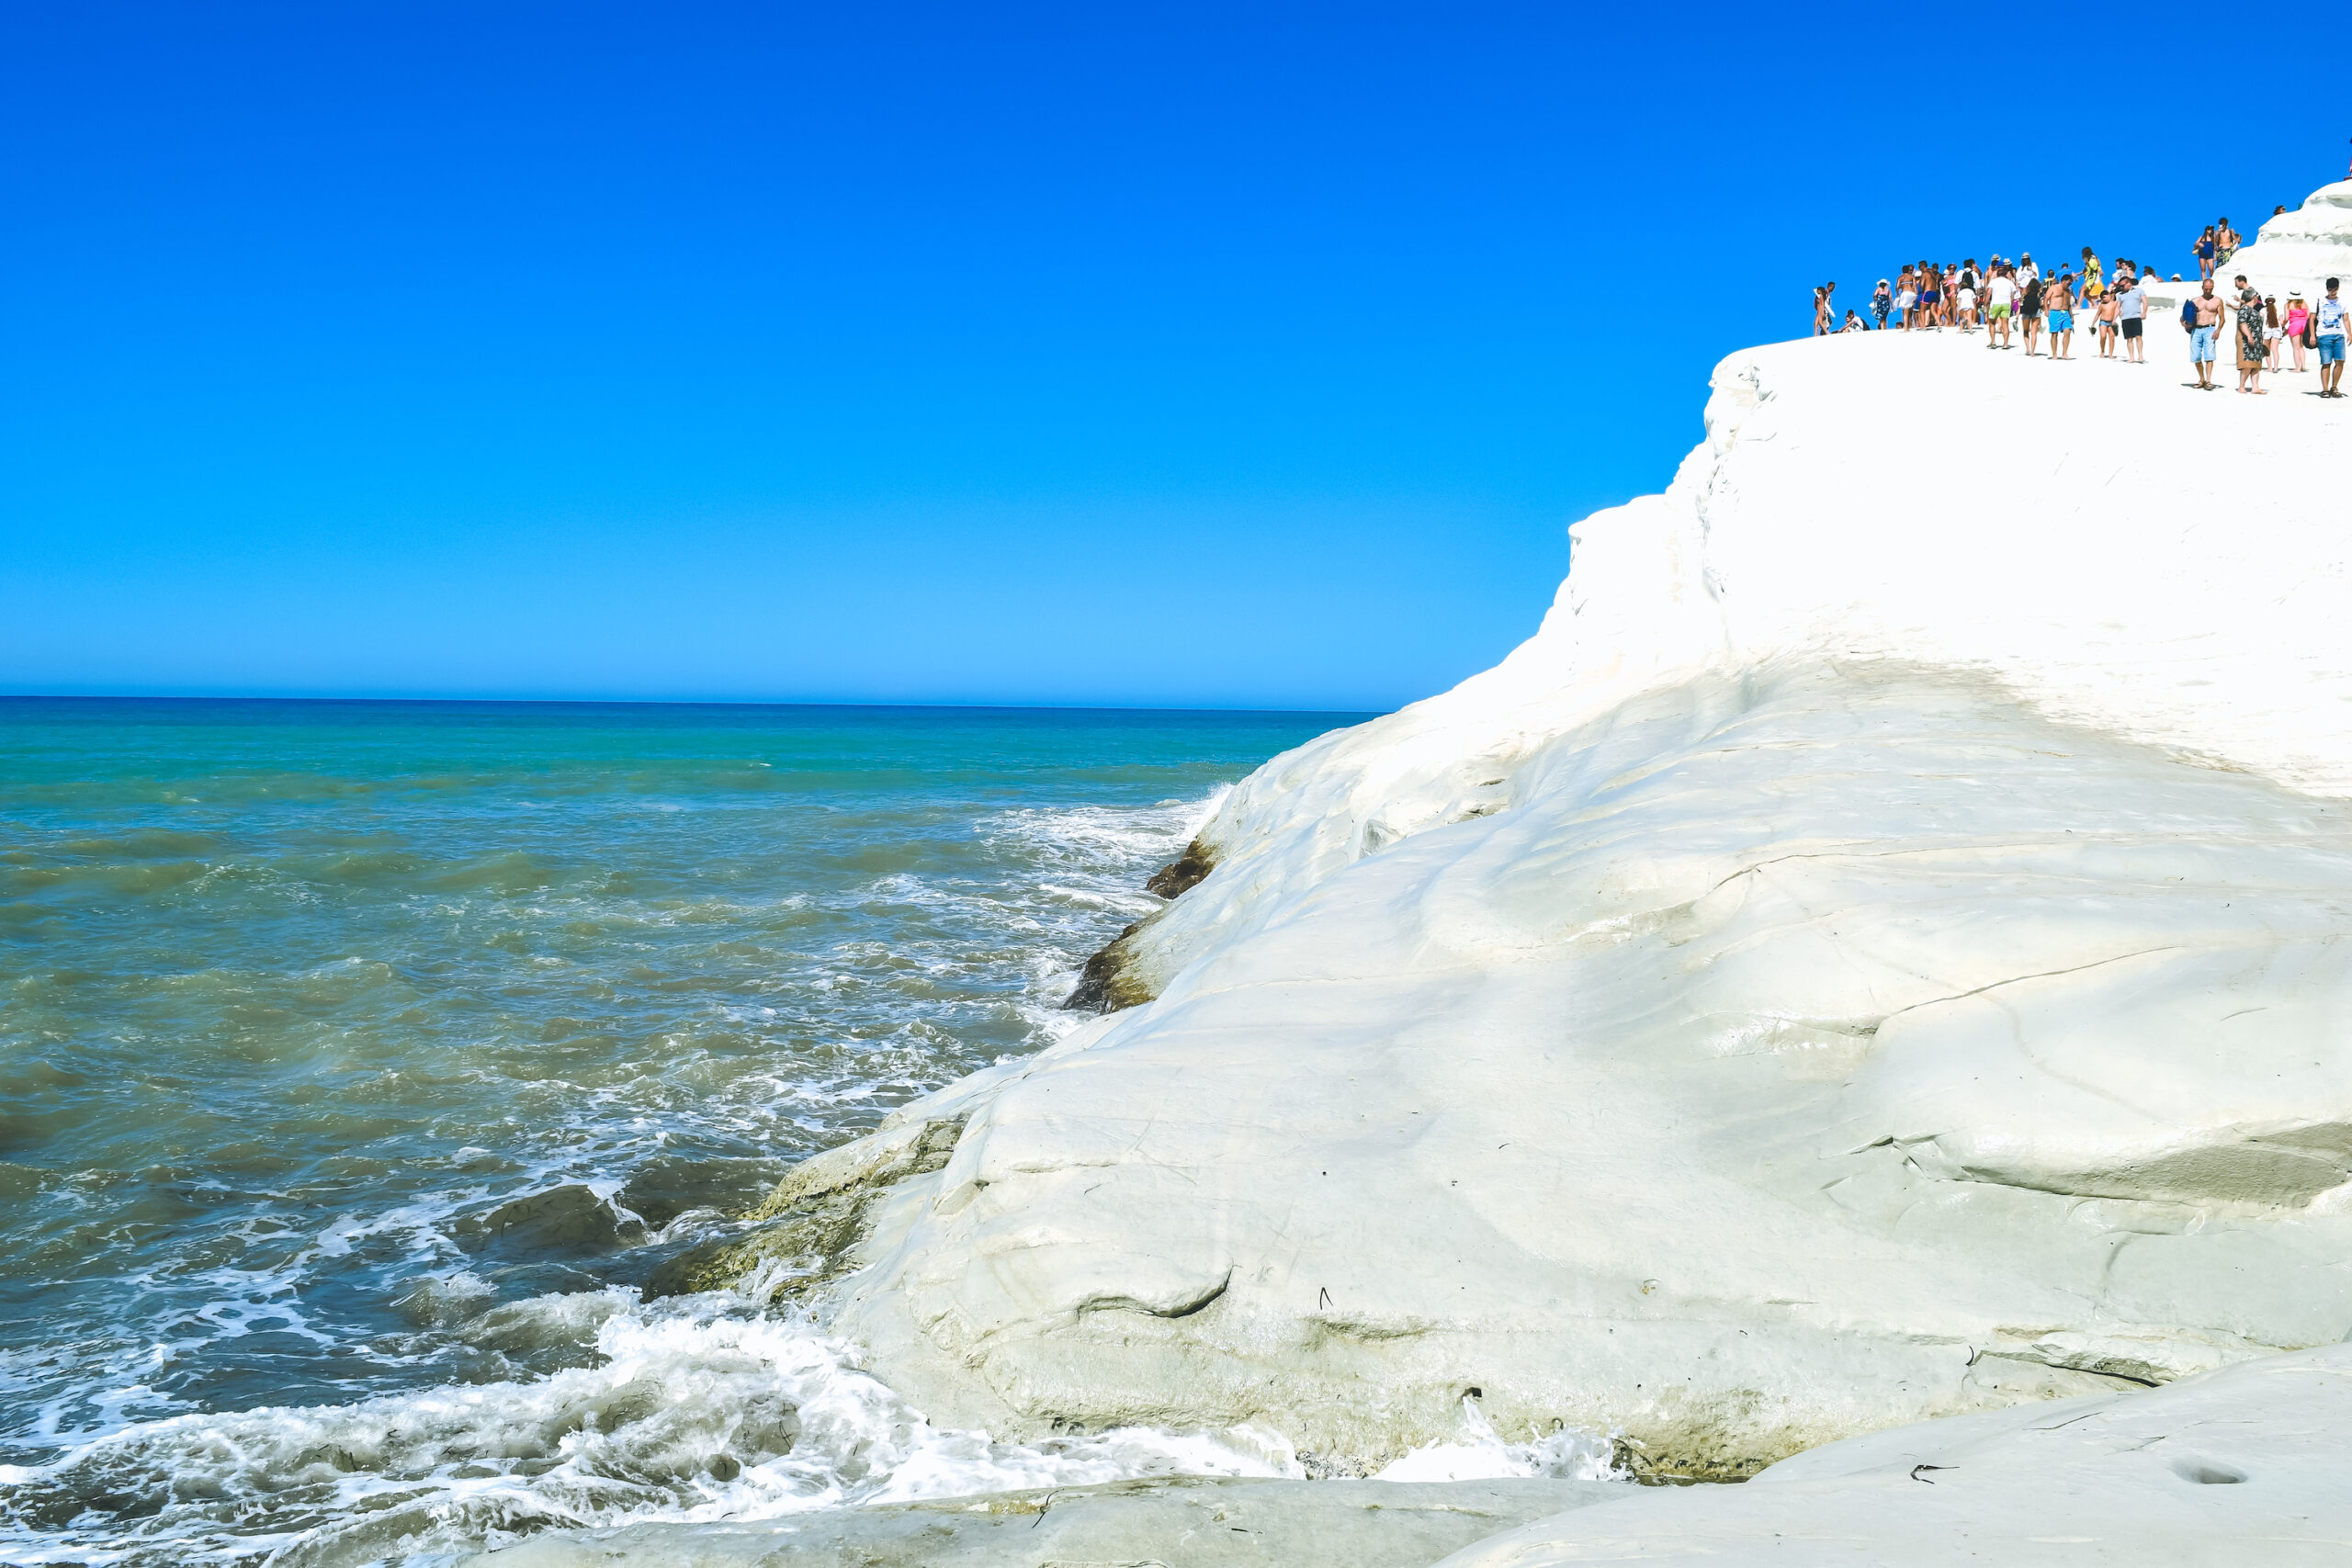 Travel guide to sicily scala dei turchi agrigento what to do see italy best time of year-5